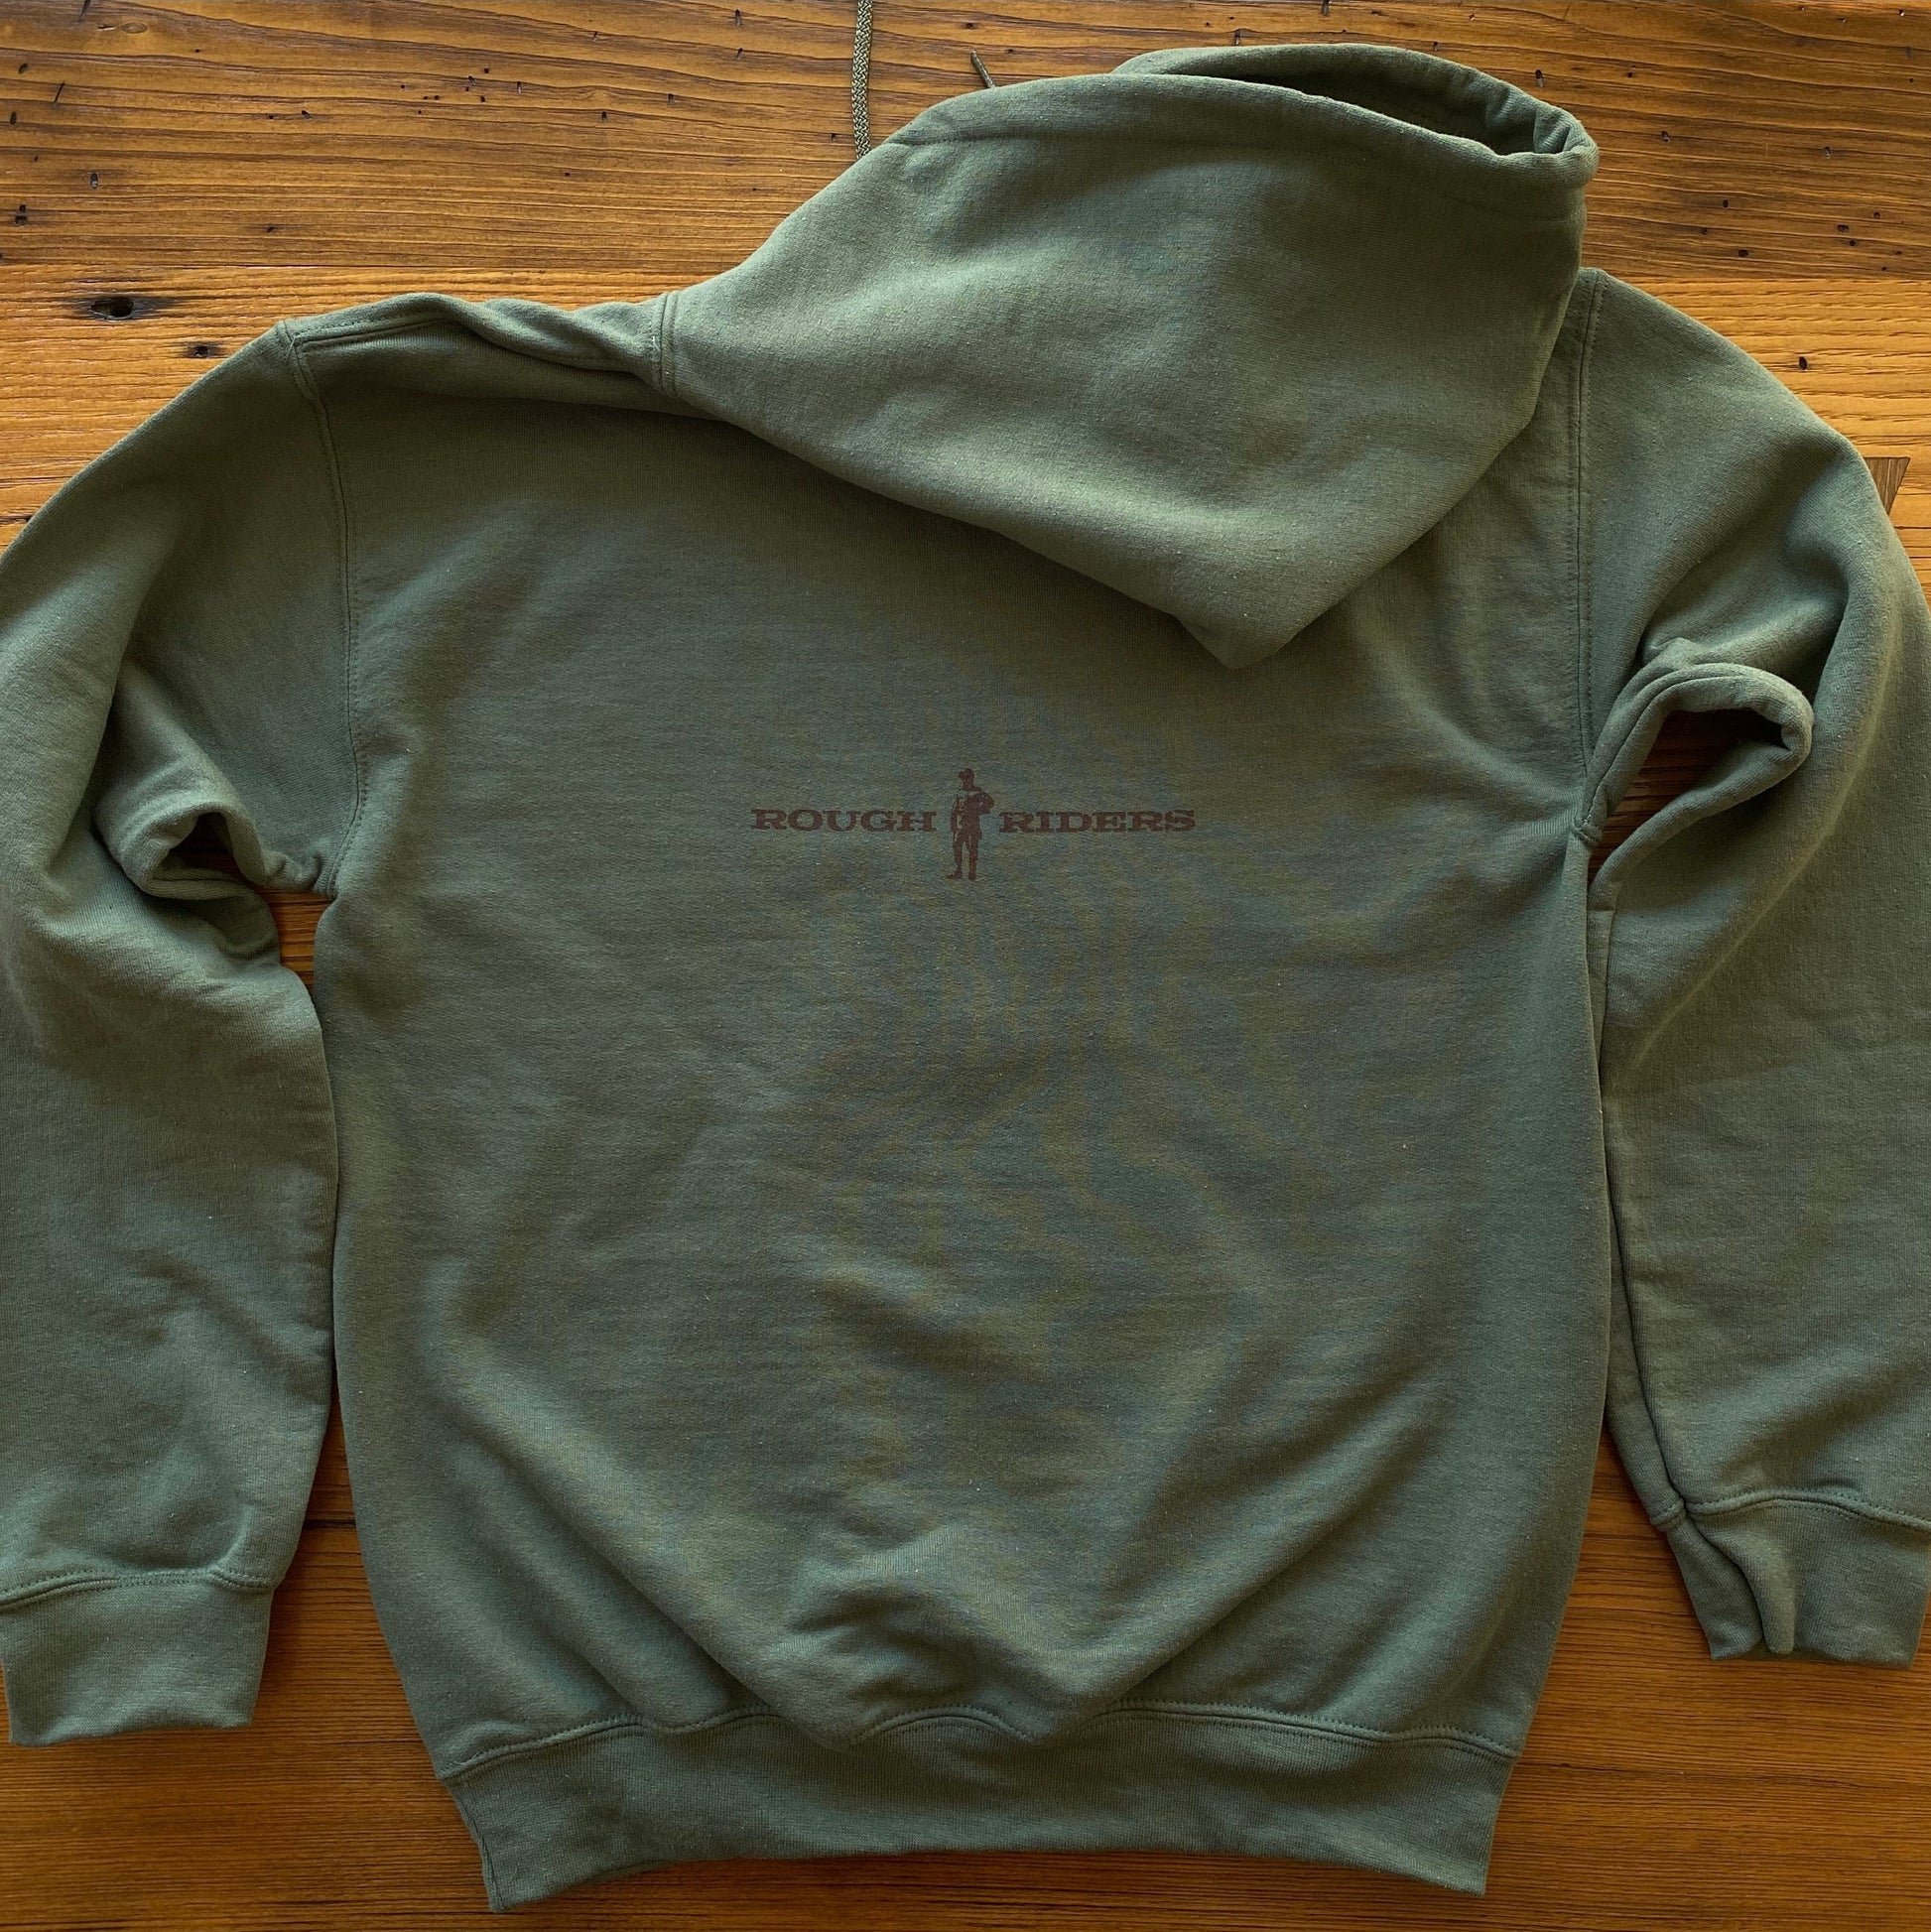 Back of Teddy Roosevelt "Rough Riders" Hooded sweatshirt from the History List Store